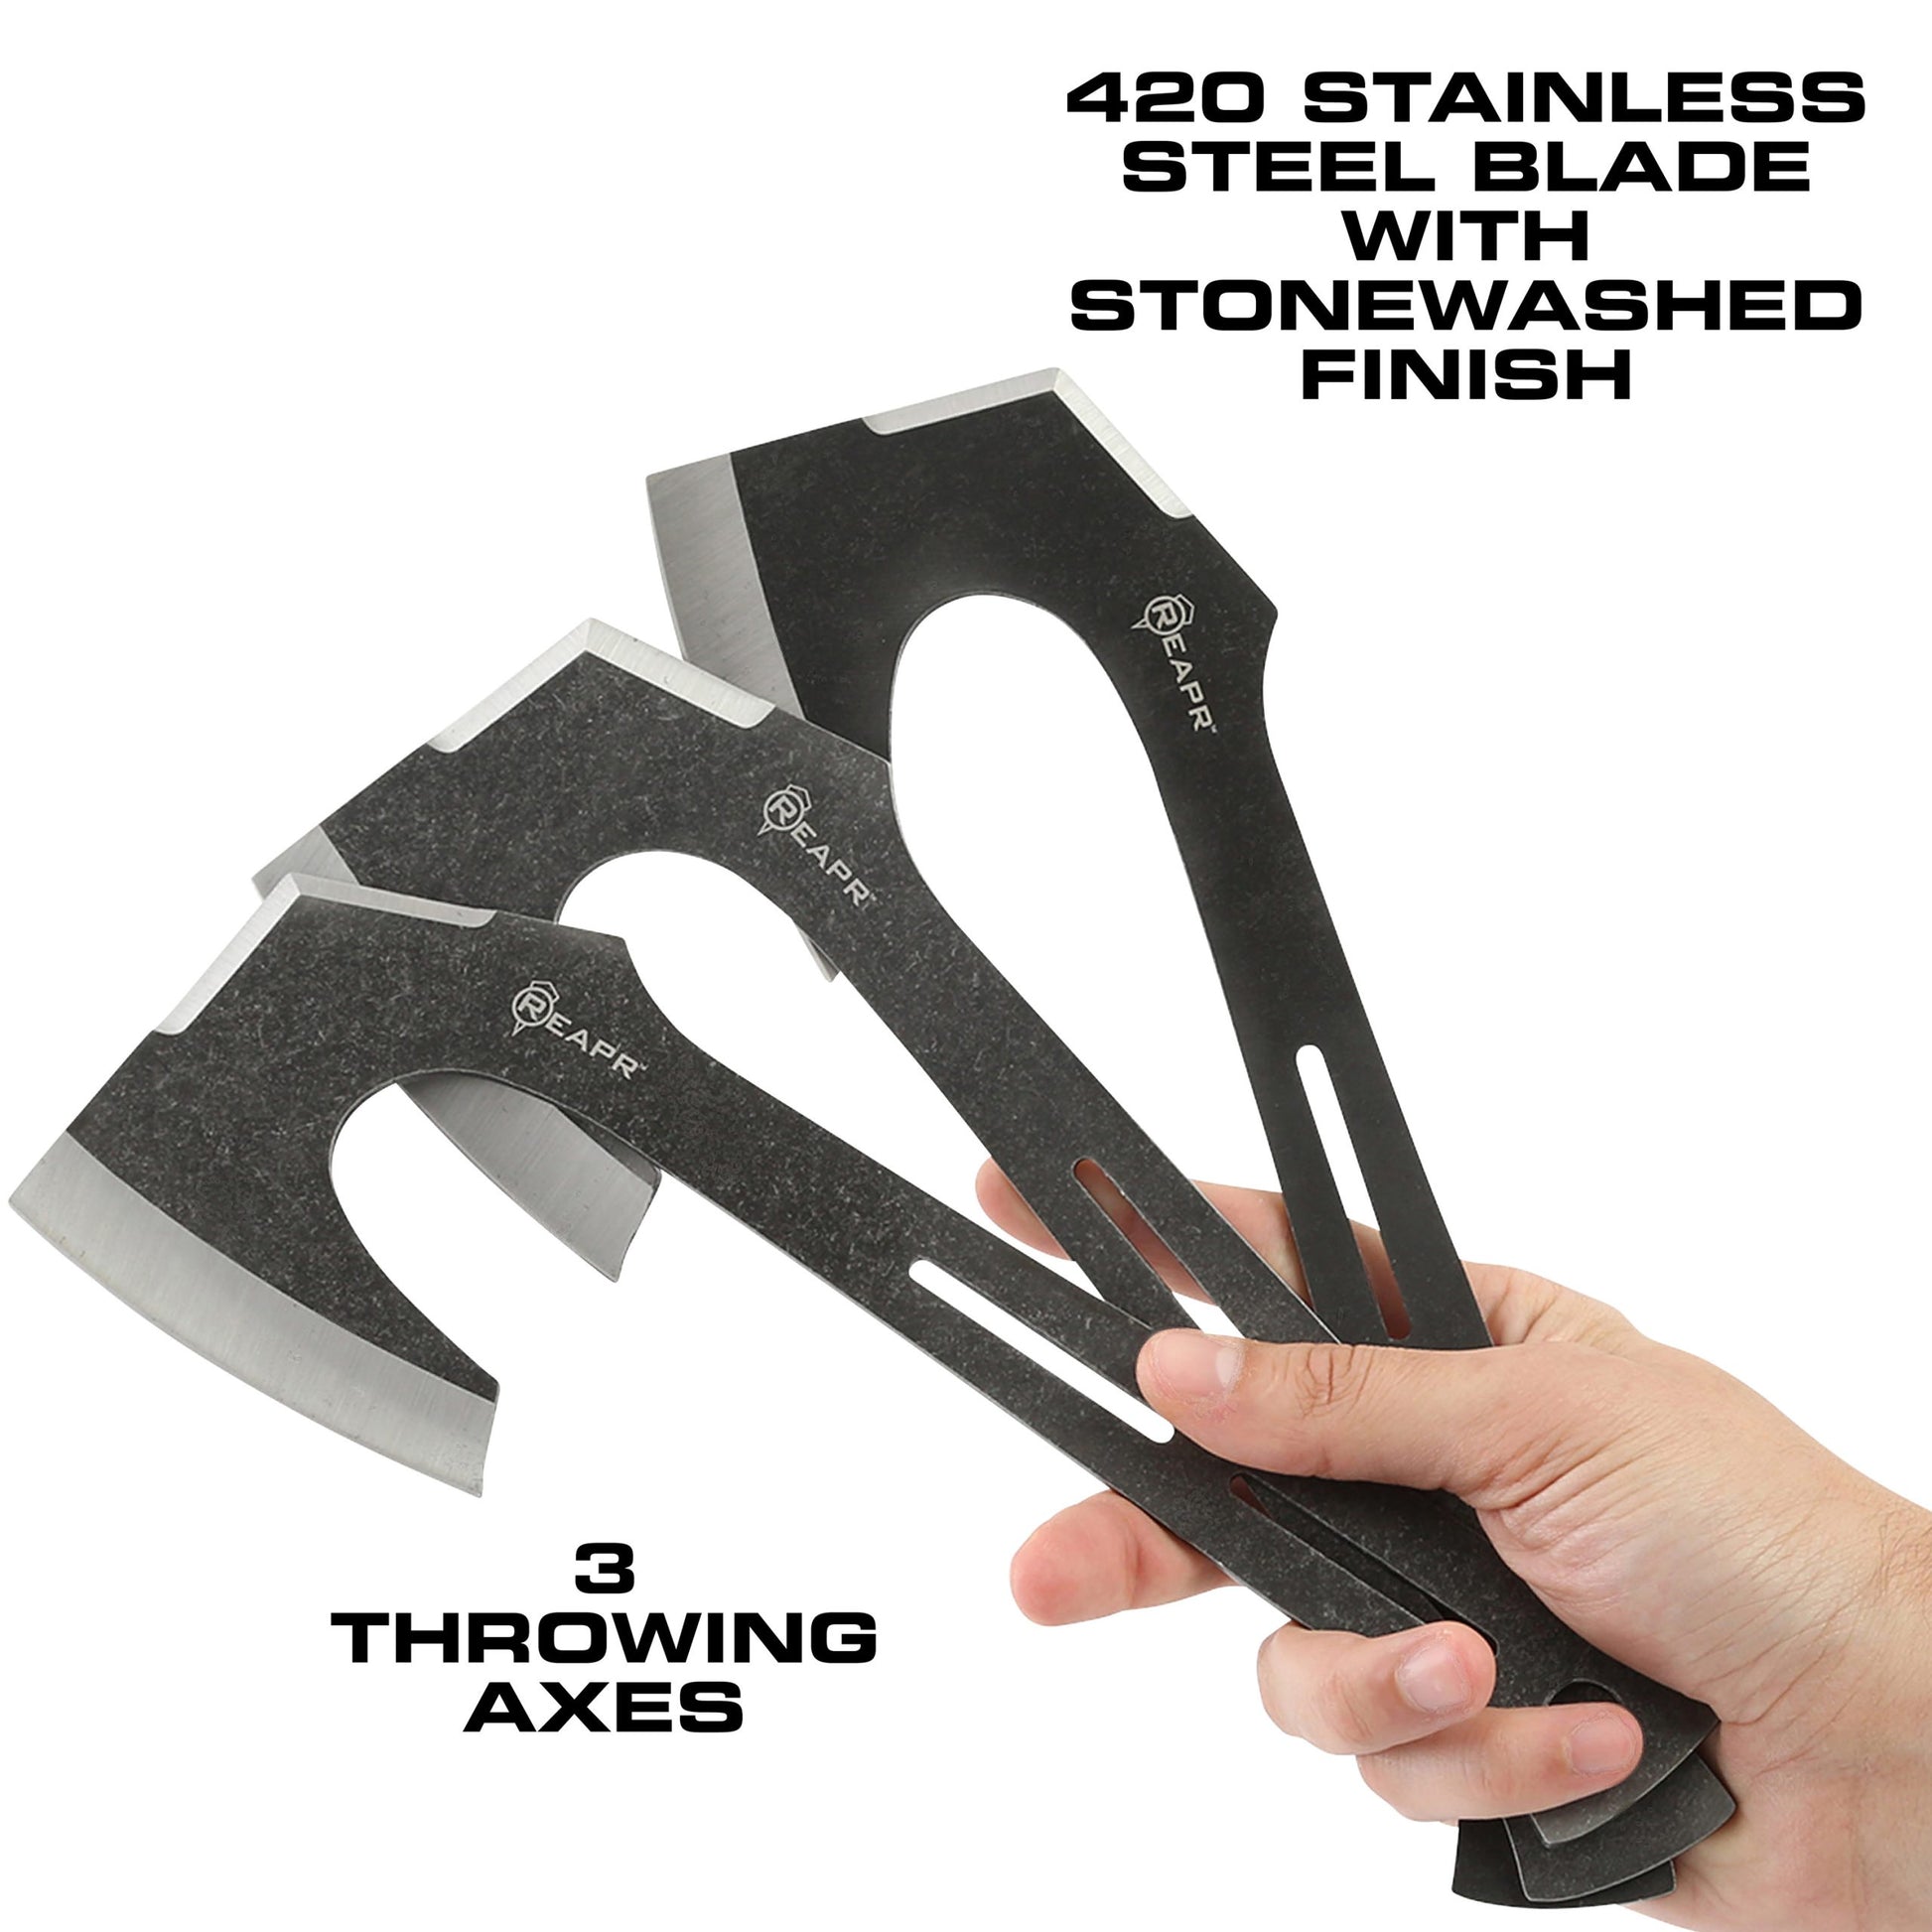 Find your perfect set of throwers in the Chuk 3 Piece Axe Set. Lightweight and ready to fly, the 3-5/8” stonewashed finished blade is perfectly balanced. These Axes are a great recreational tool for camping, parties, barbecues and more. www.defenceqstore.com.au